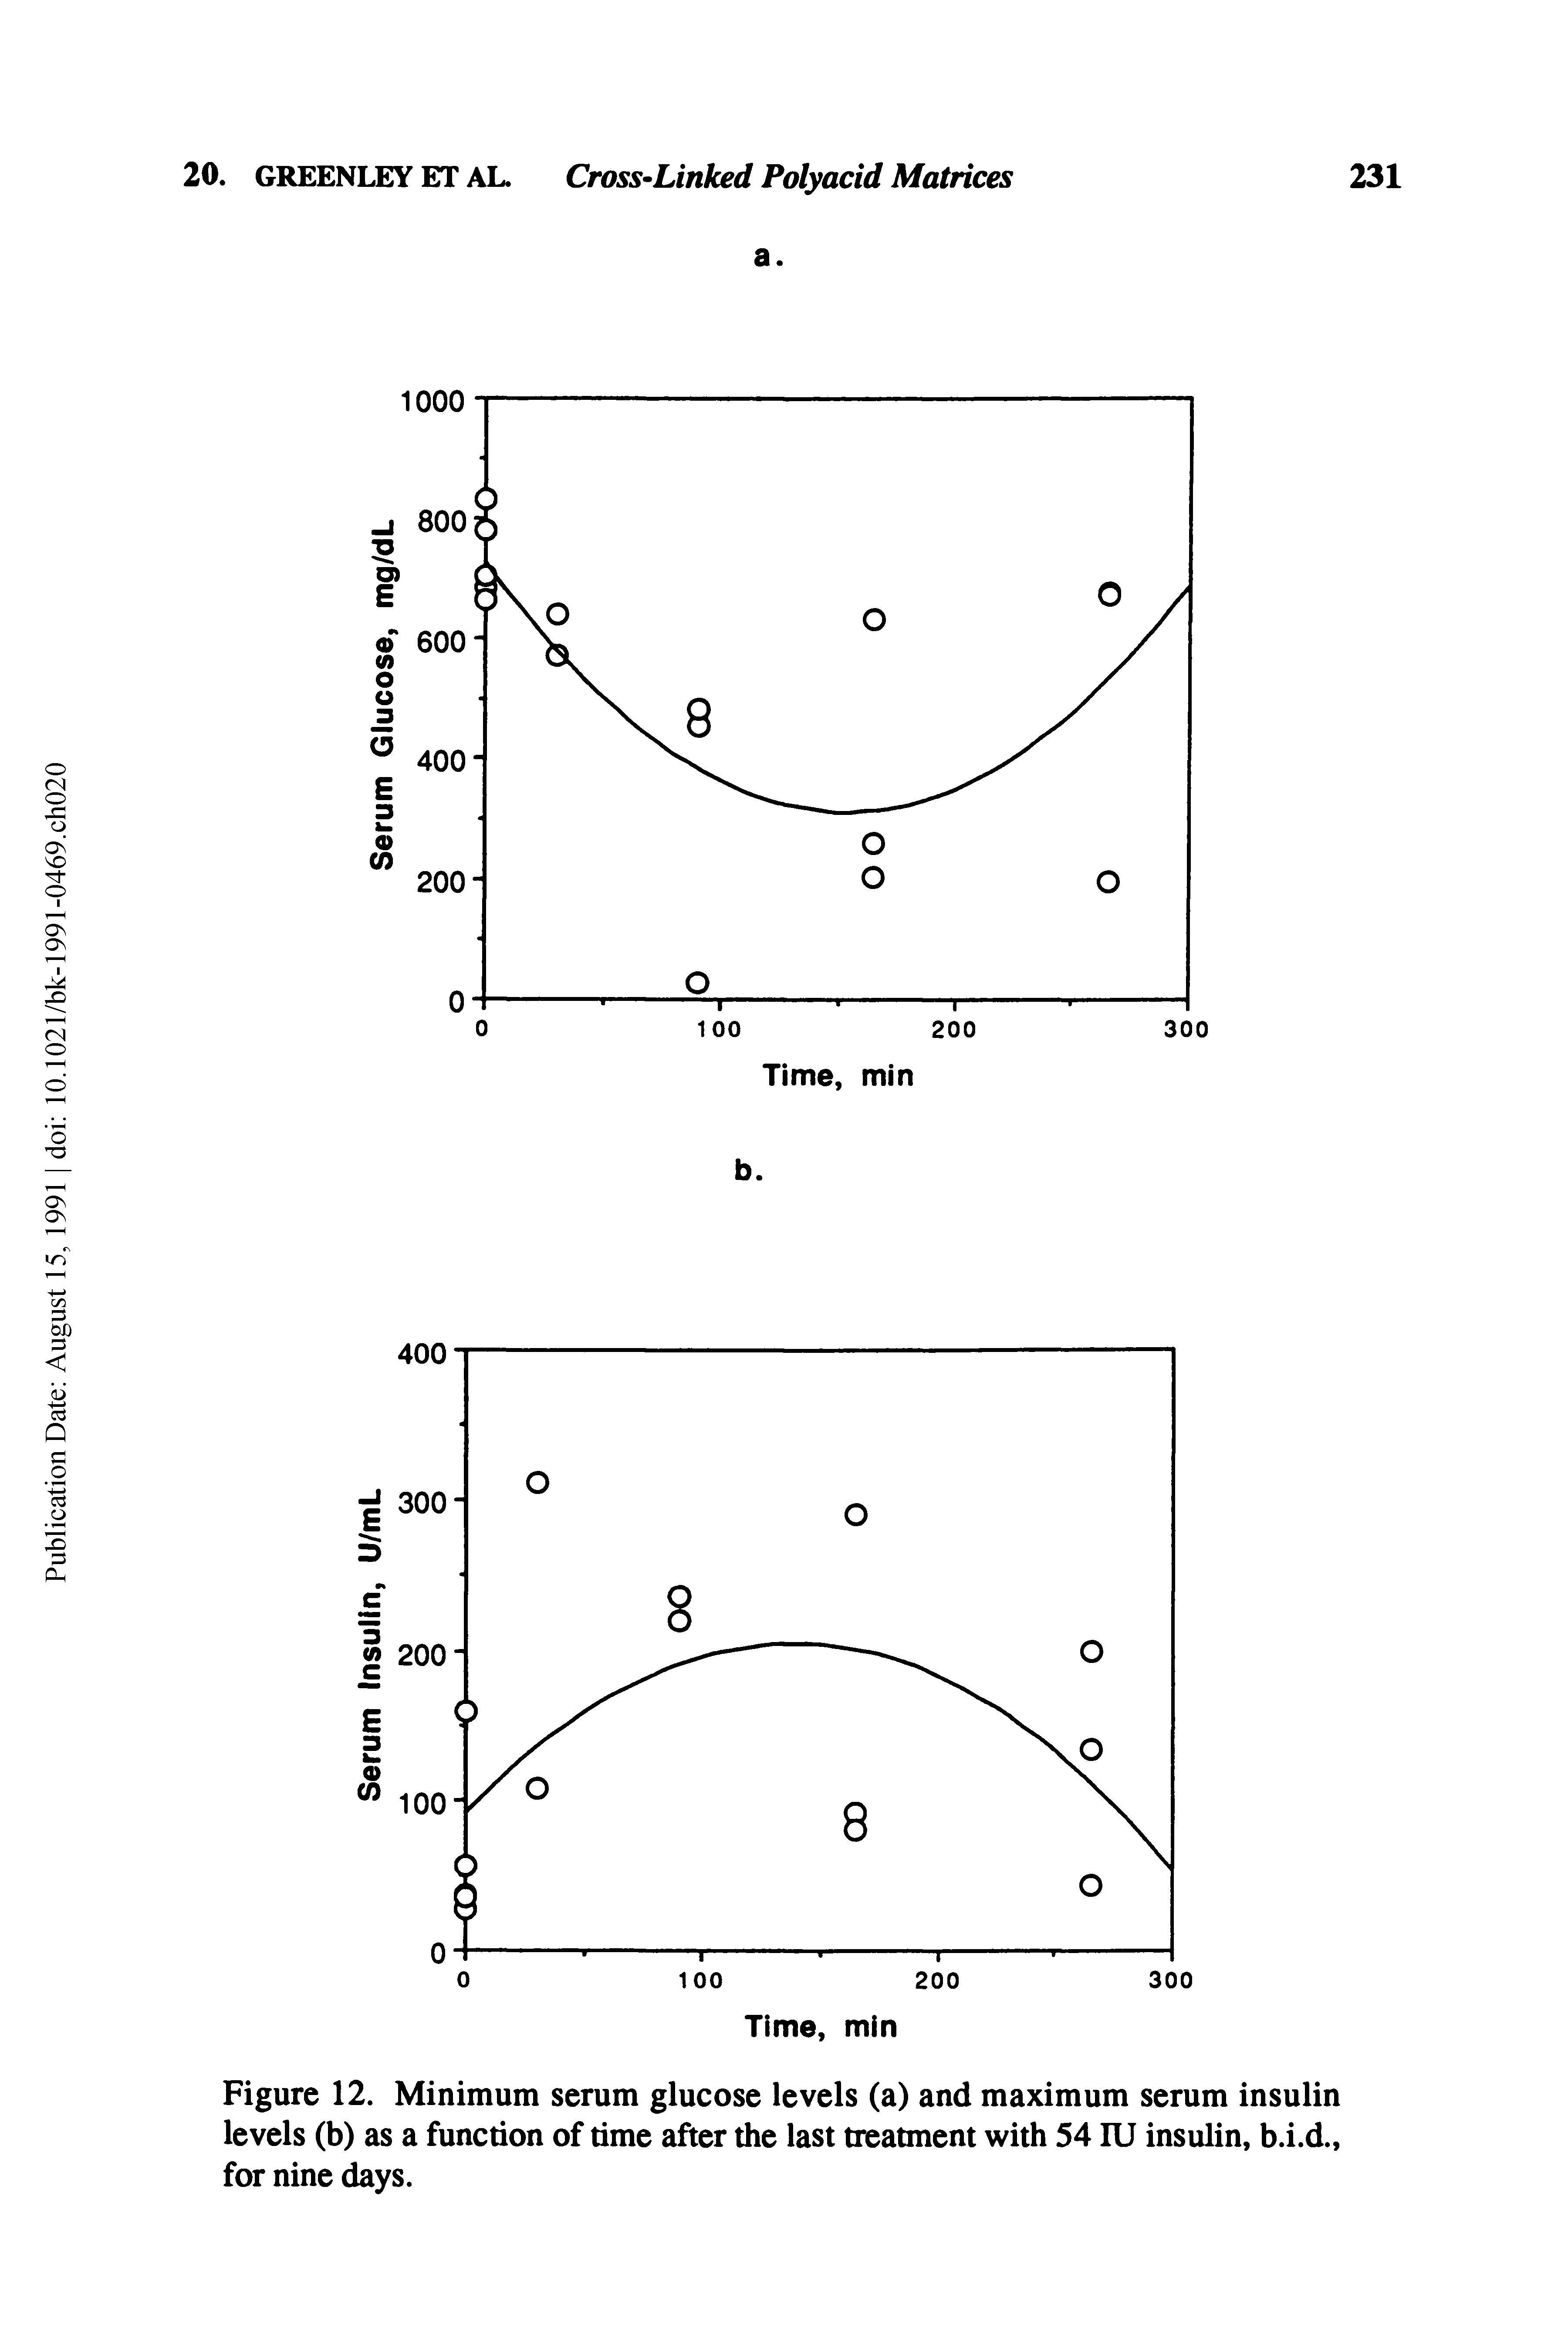 Figure 12. Minimum serum glucose levels (a) and maximum serum insulin levels (b) as a function of time after the last treatment with 54IU insulin, b.i.d., for nine days.